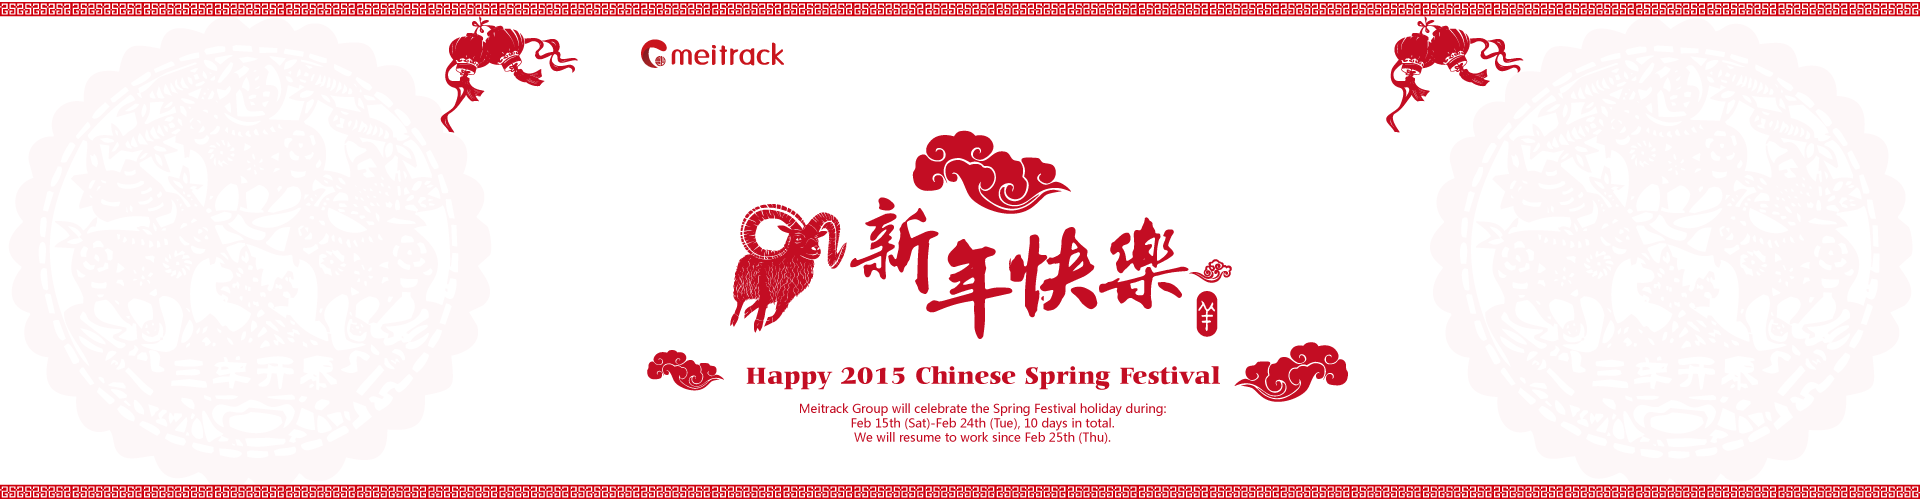 2015 Chinese Spring Festival